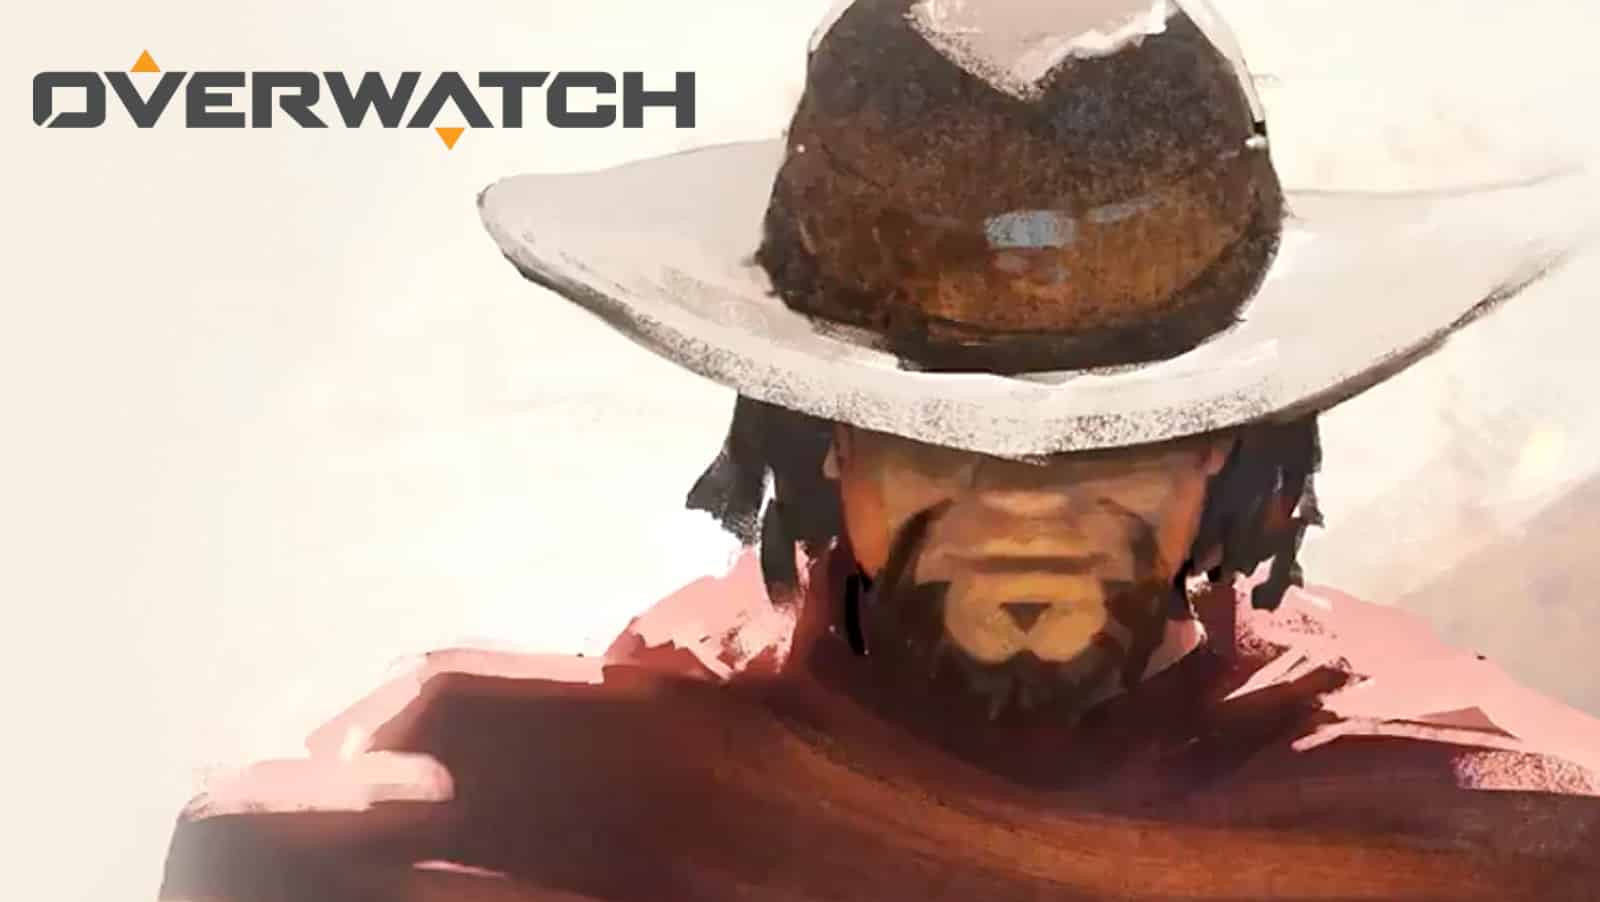 Overwatch artistic cowboy drawing with logo